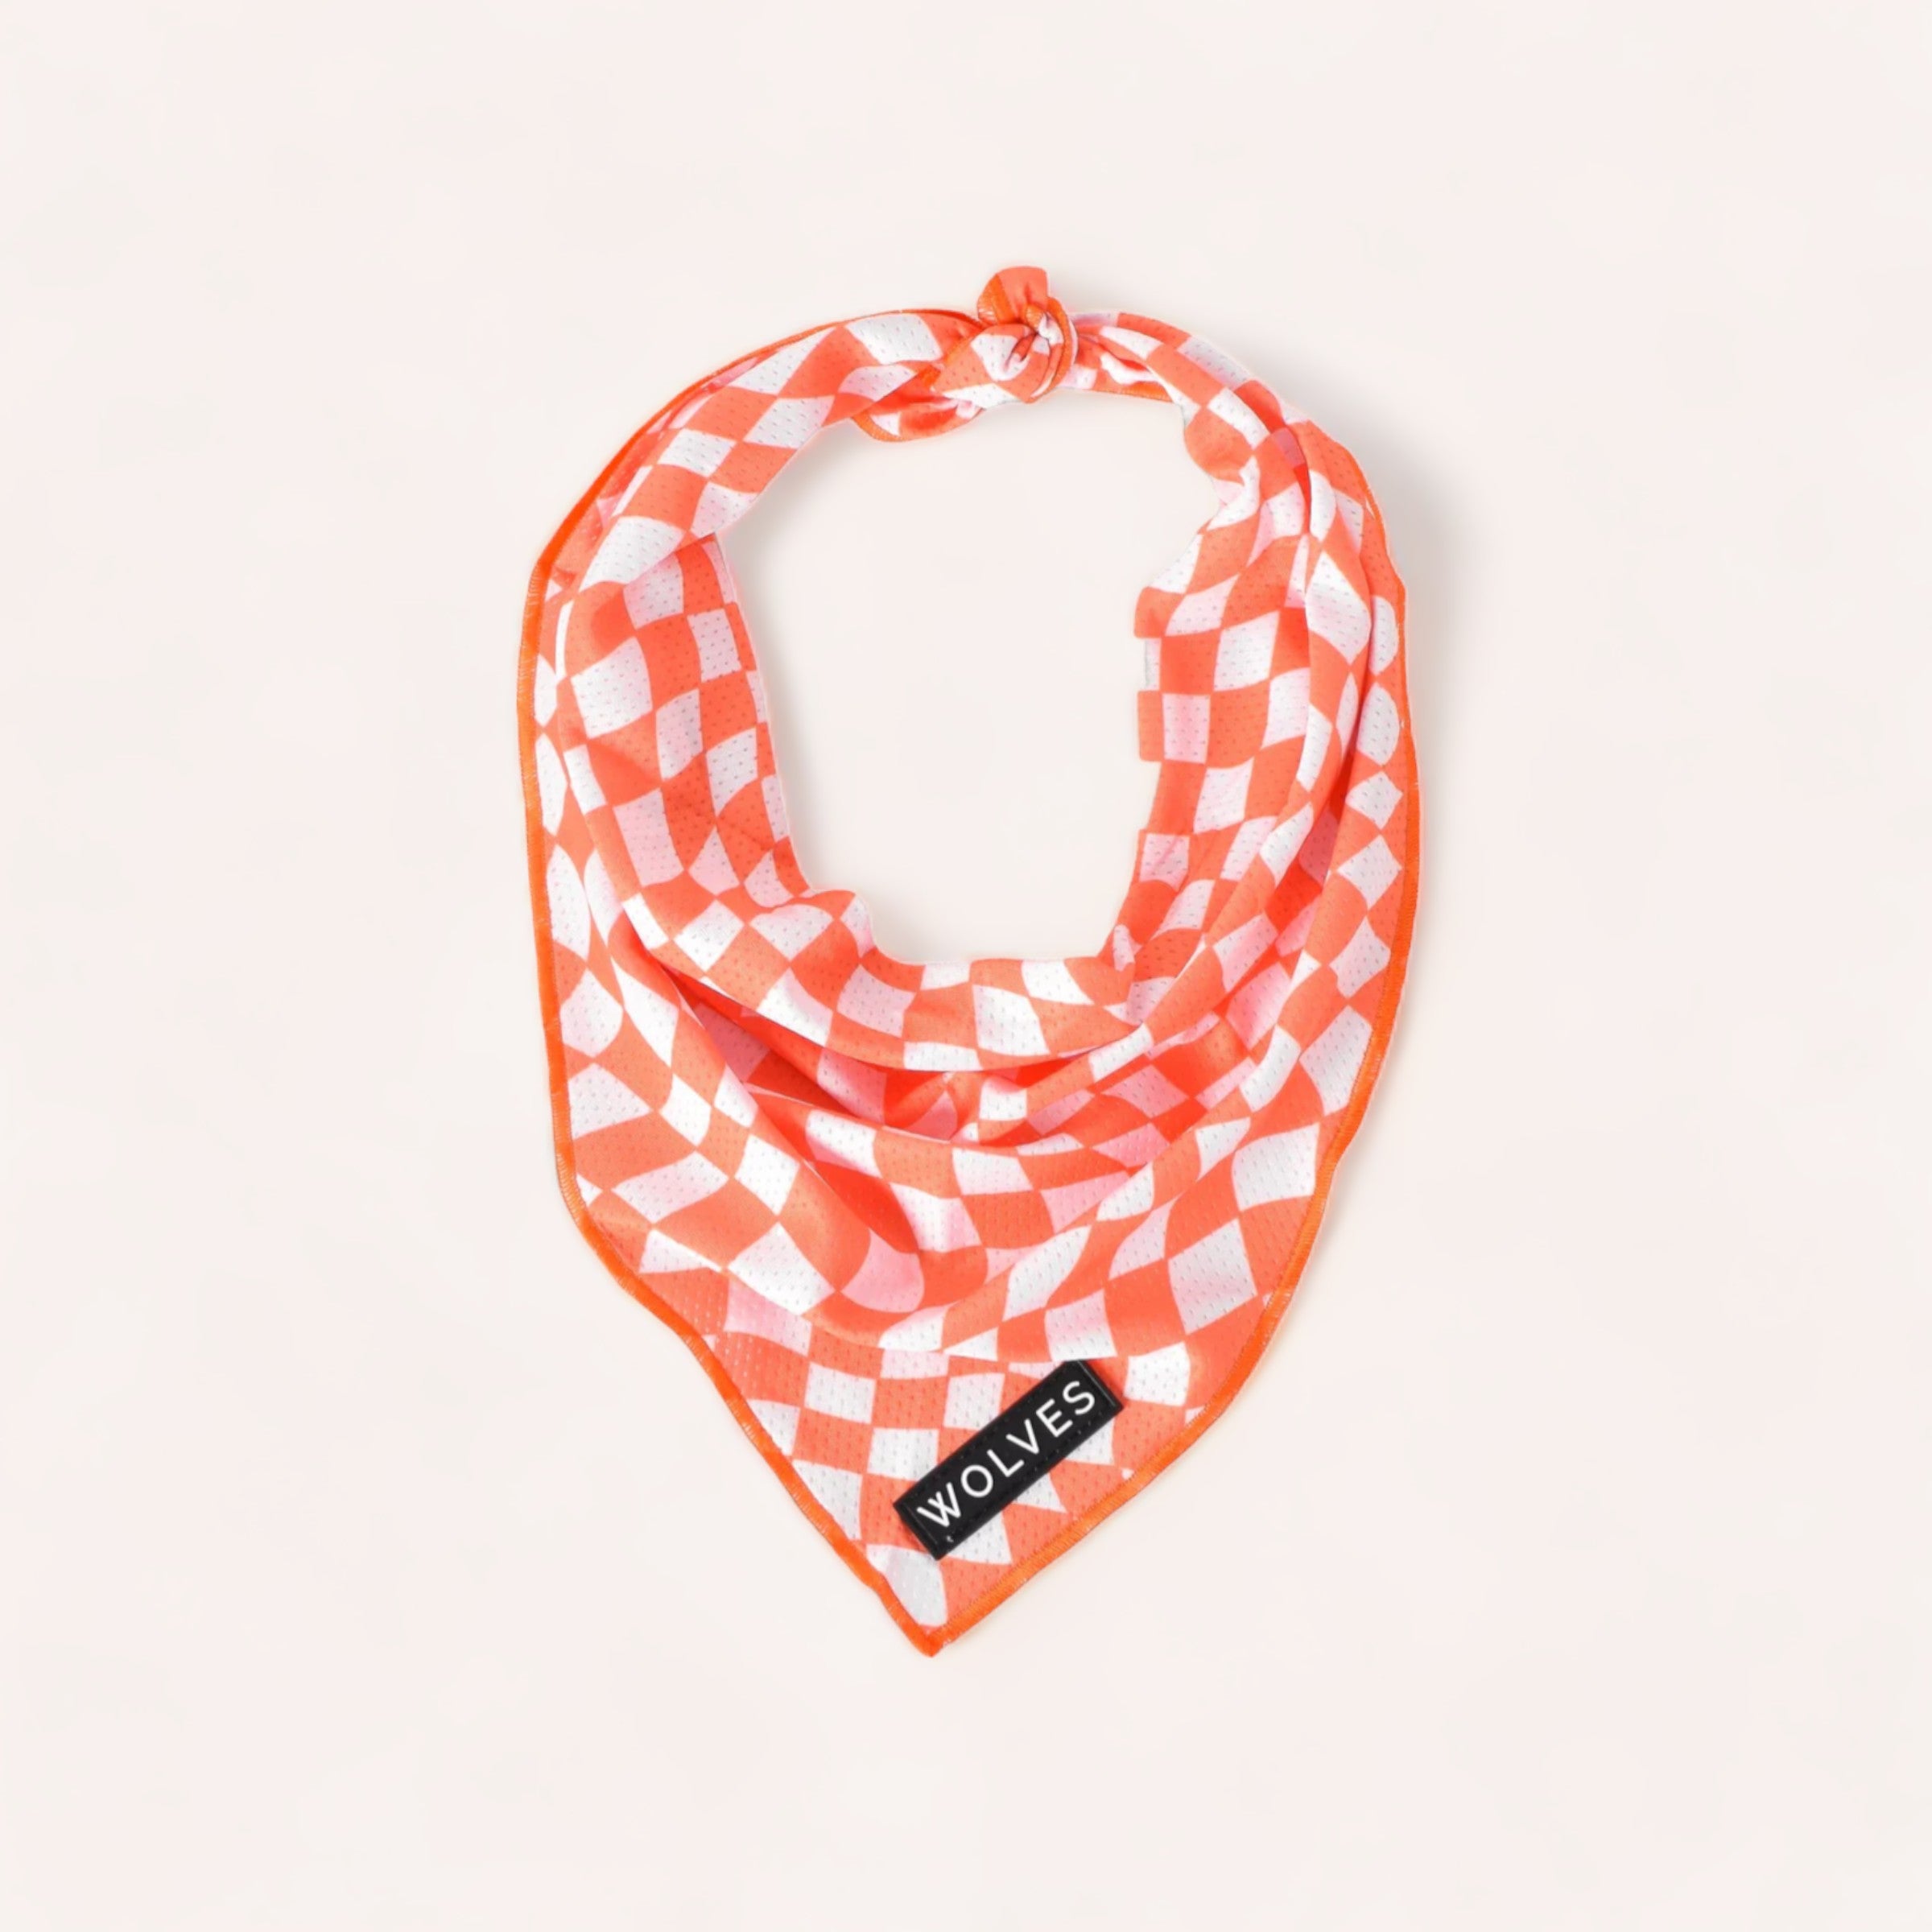 Orange and lightweight mesh material Benji Bandanas by Wolves of Wellington with the word "wolves" on a label, displayed on a plain background.